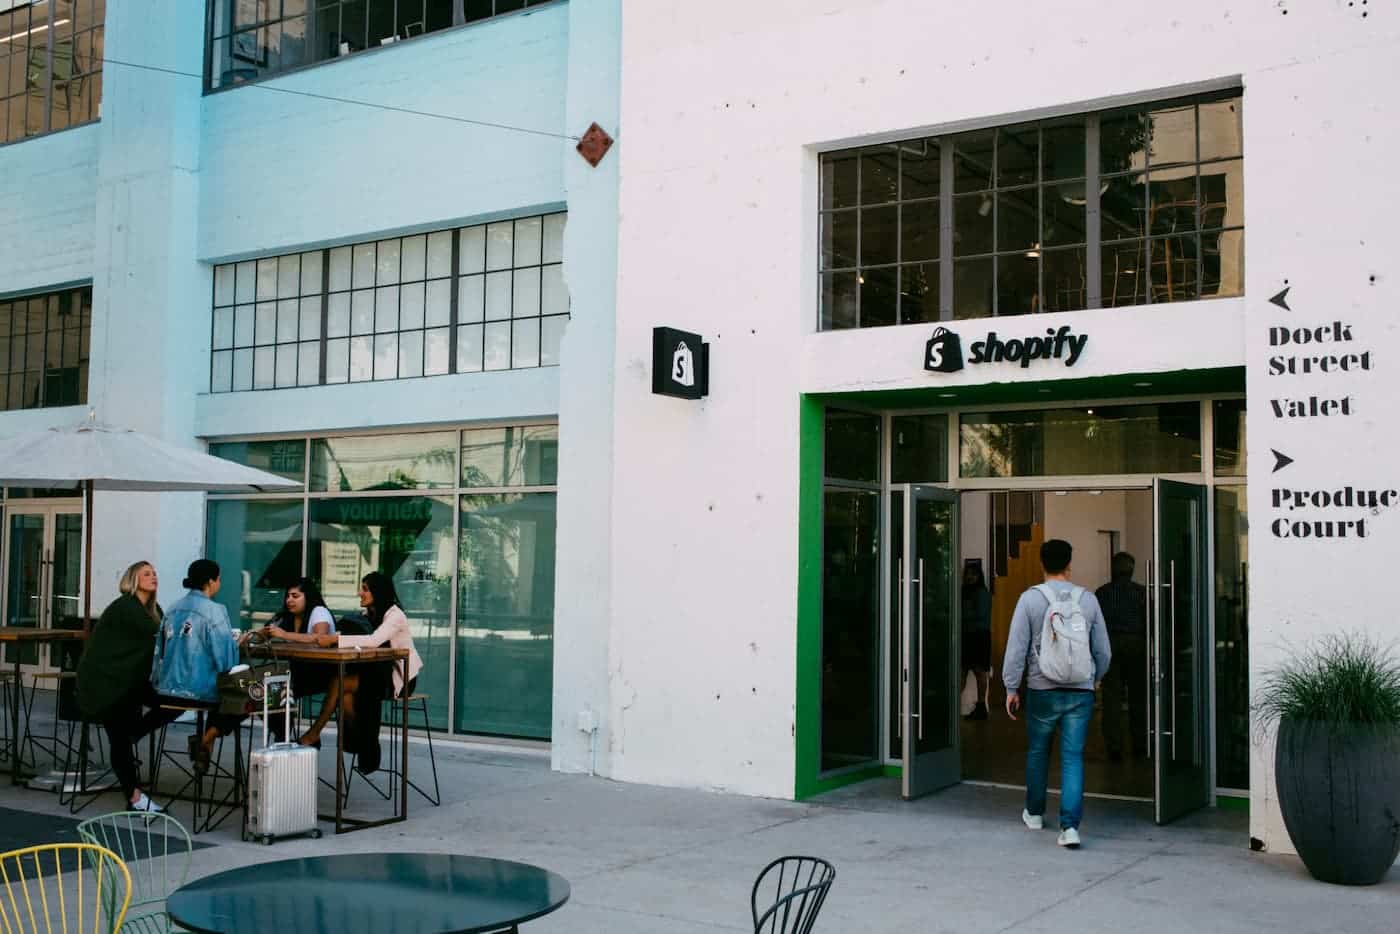 Shopify's brick-and-mortar winkel in downtown LA